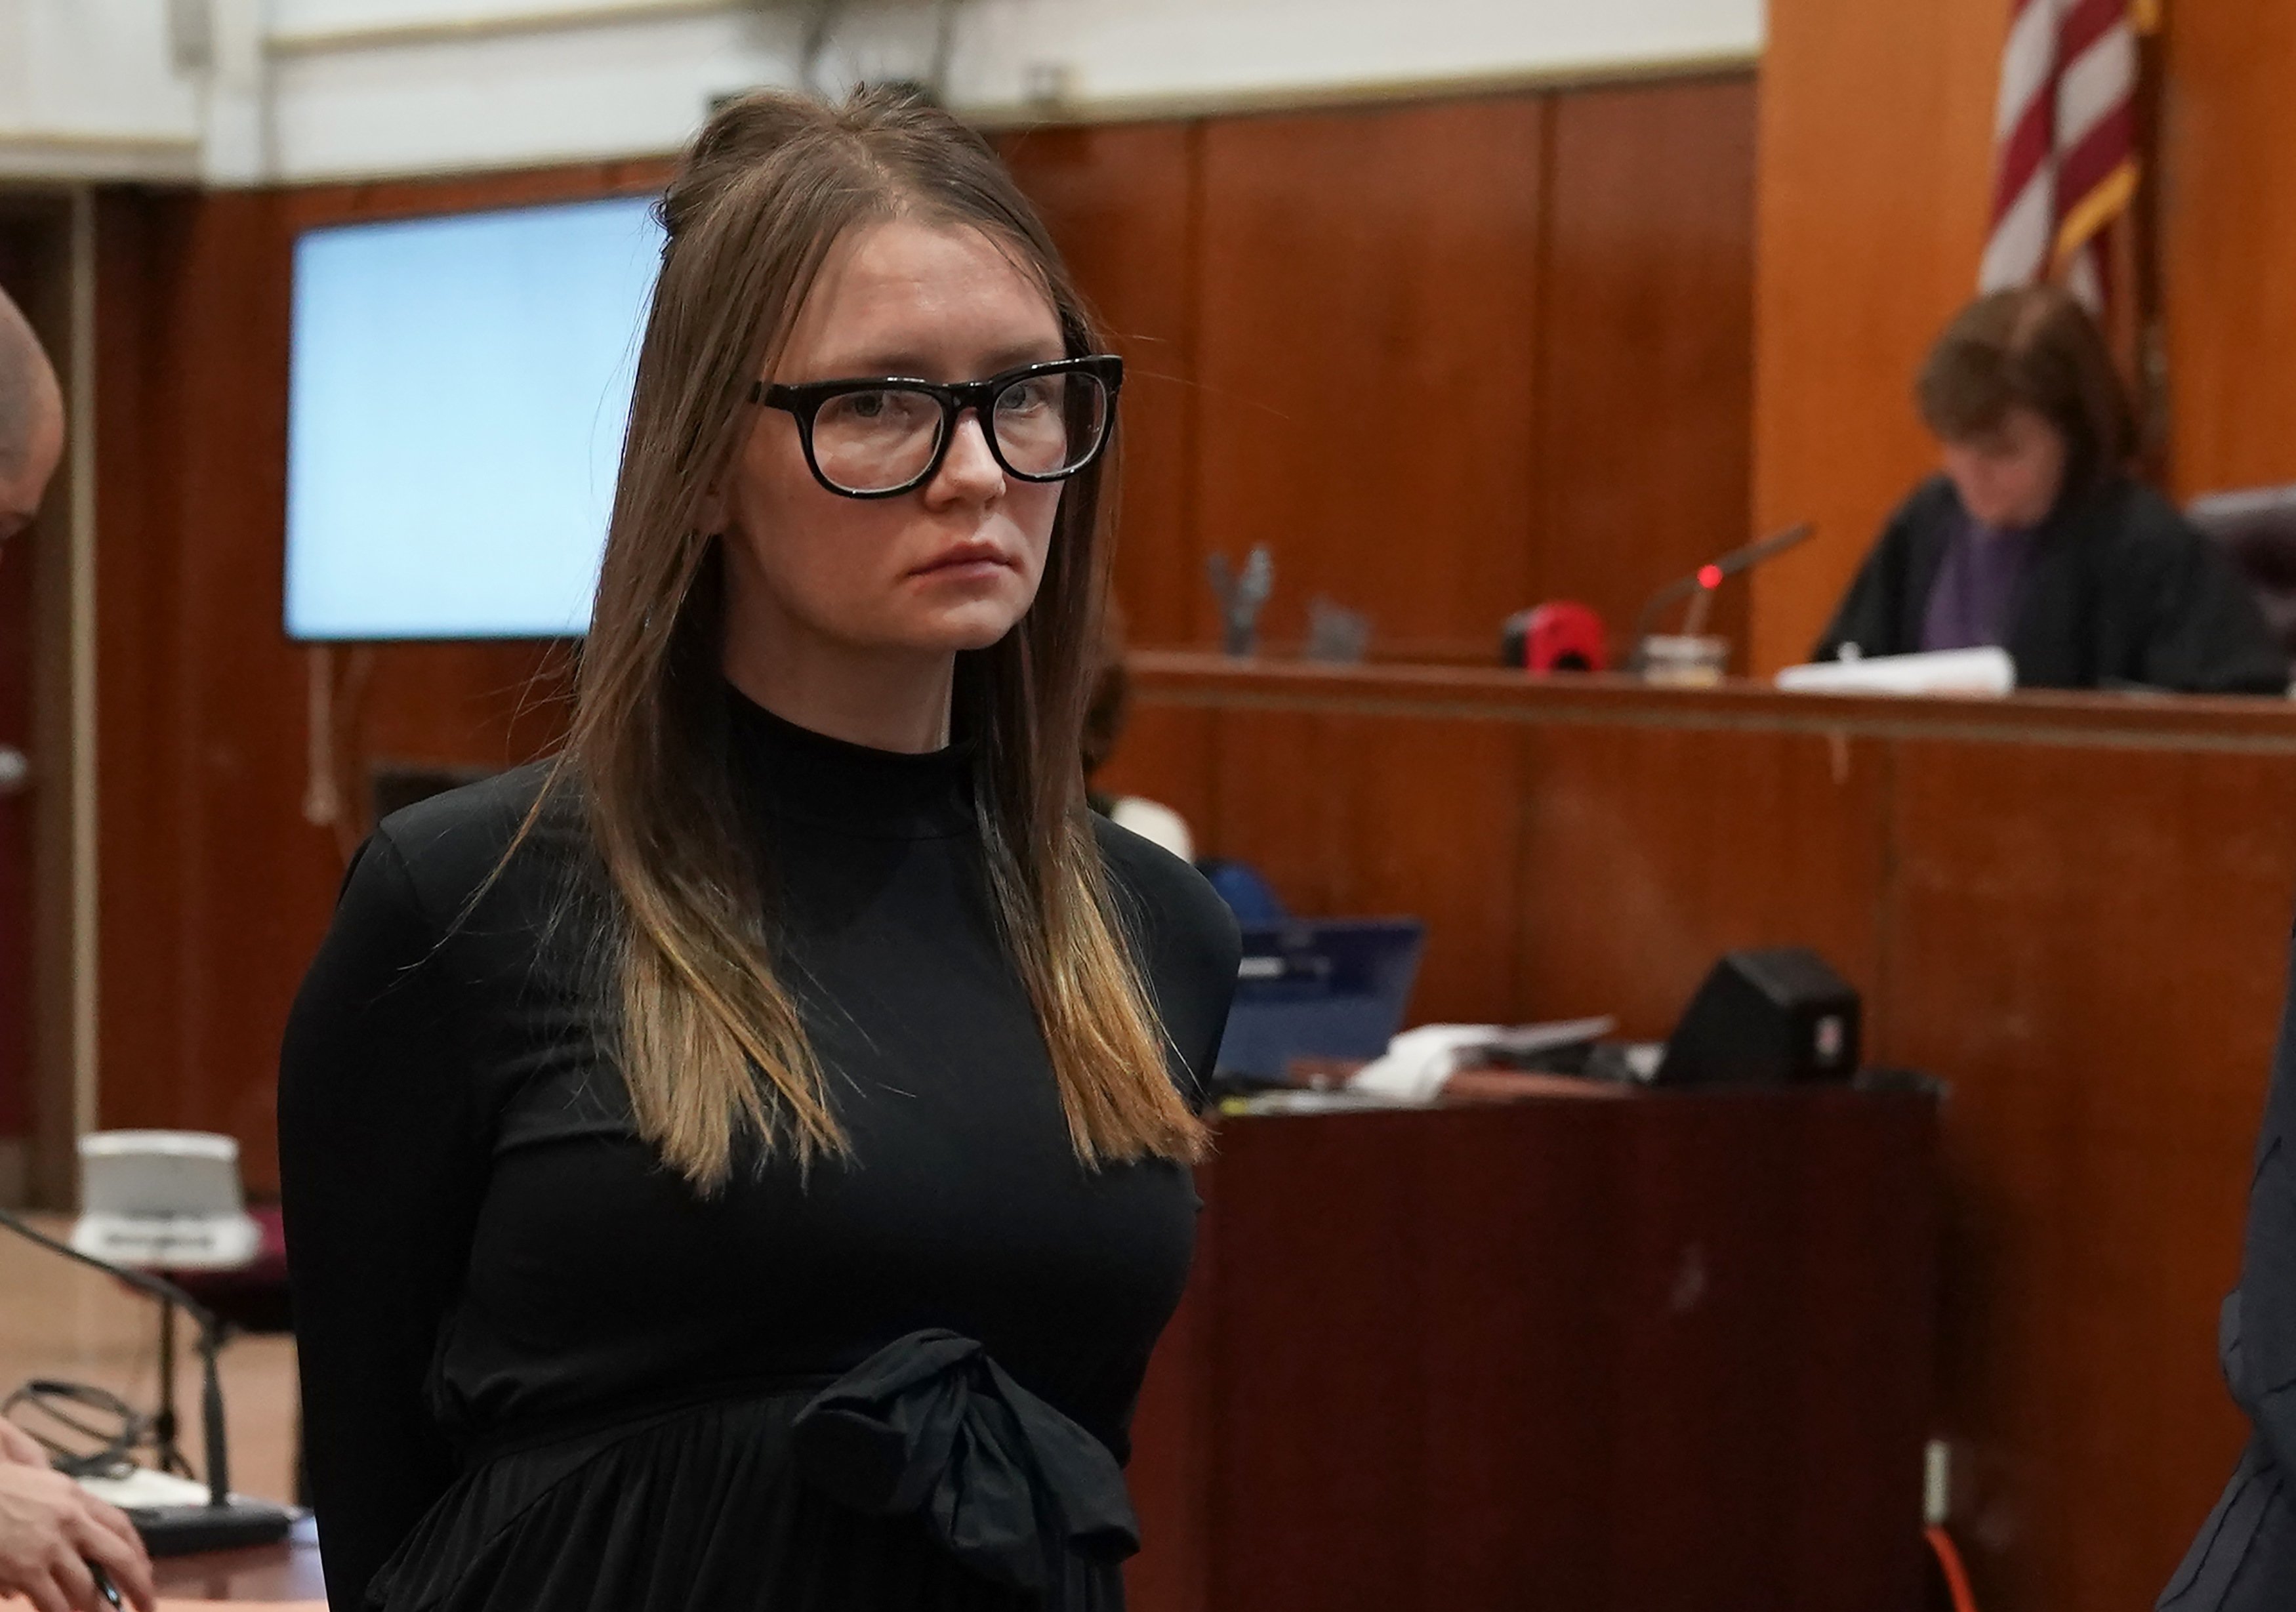 Anna Delvey in court; she served two years in prison and is currently in an ICE facility for an expired visa